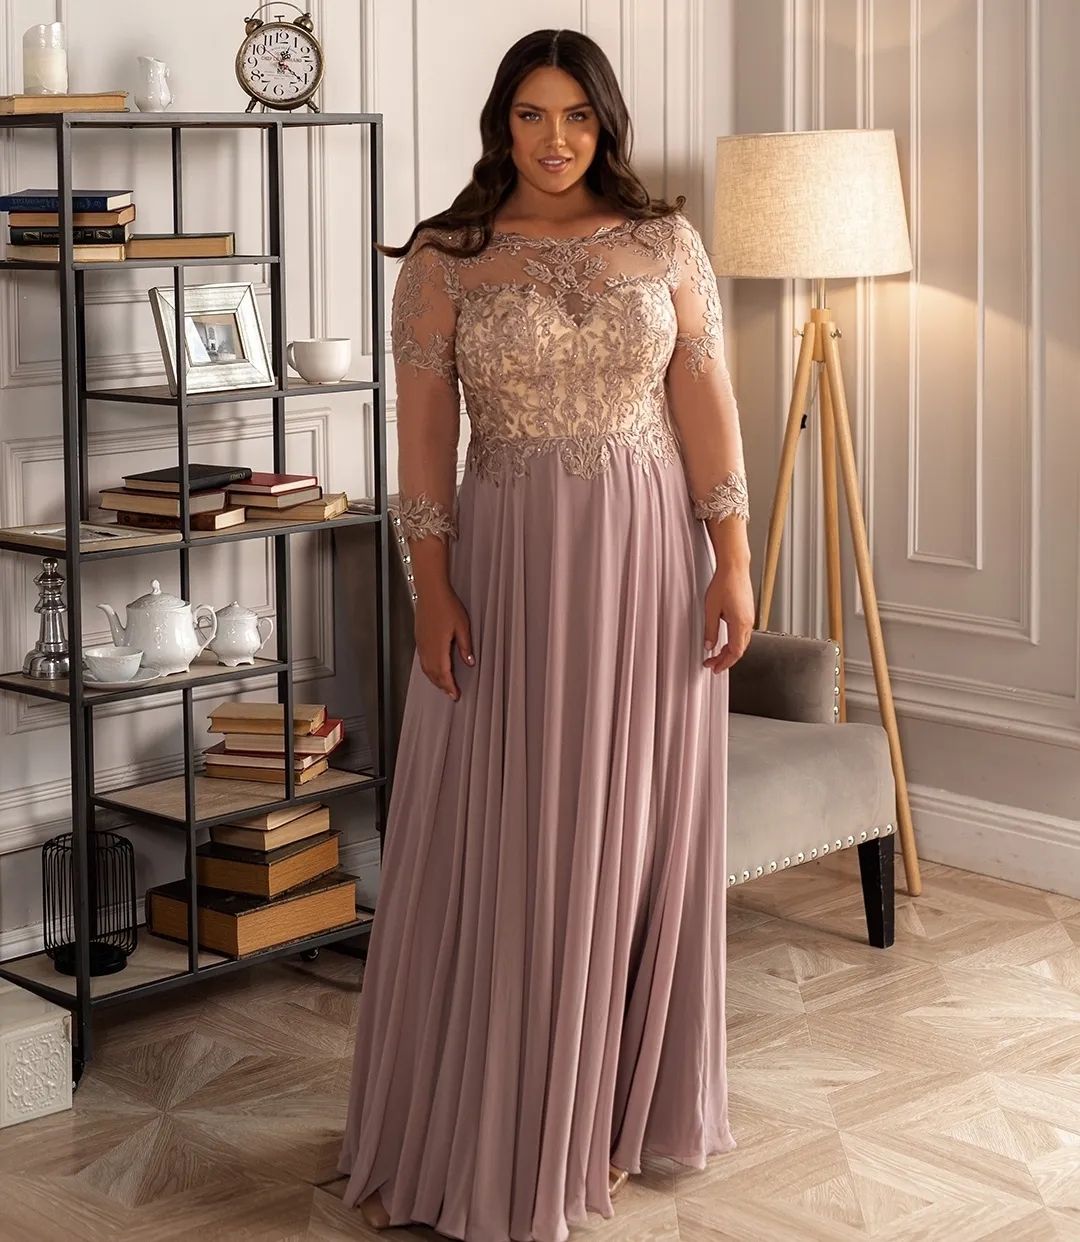 Charming Beaded Lace Plus Size Prom Dresses Sheer Bateau Neck A Line Long Sleeves Evening Gowns Floor Length Chiffon Formal Dress